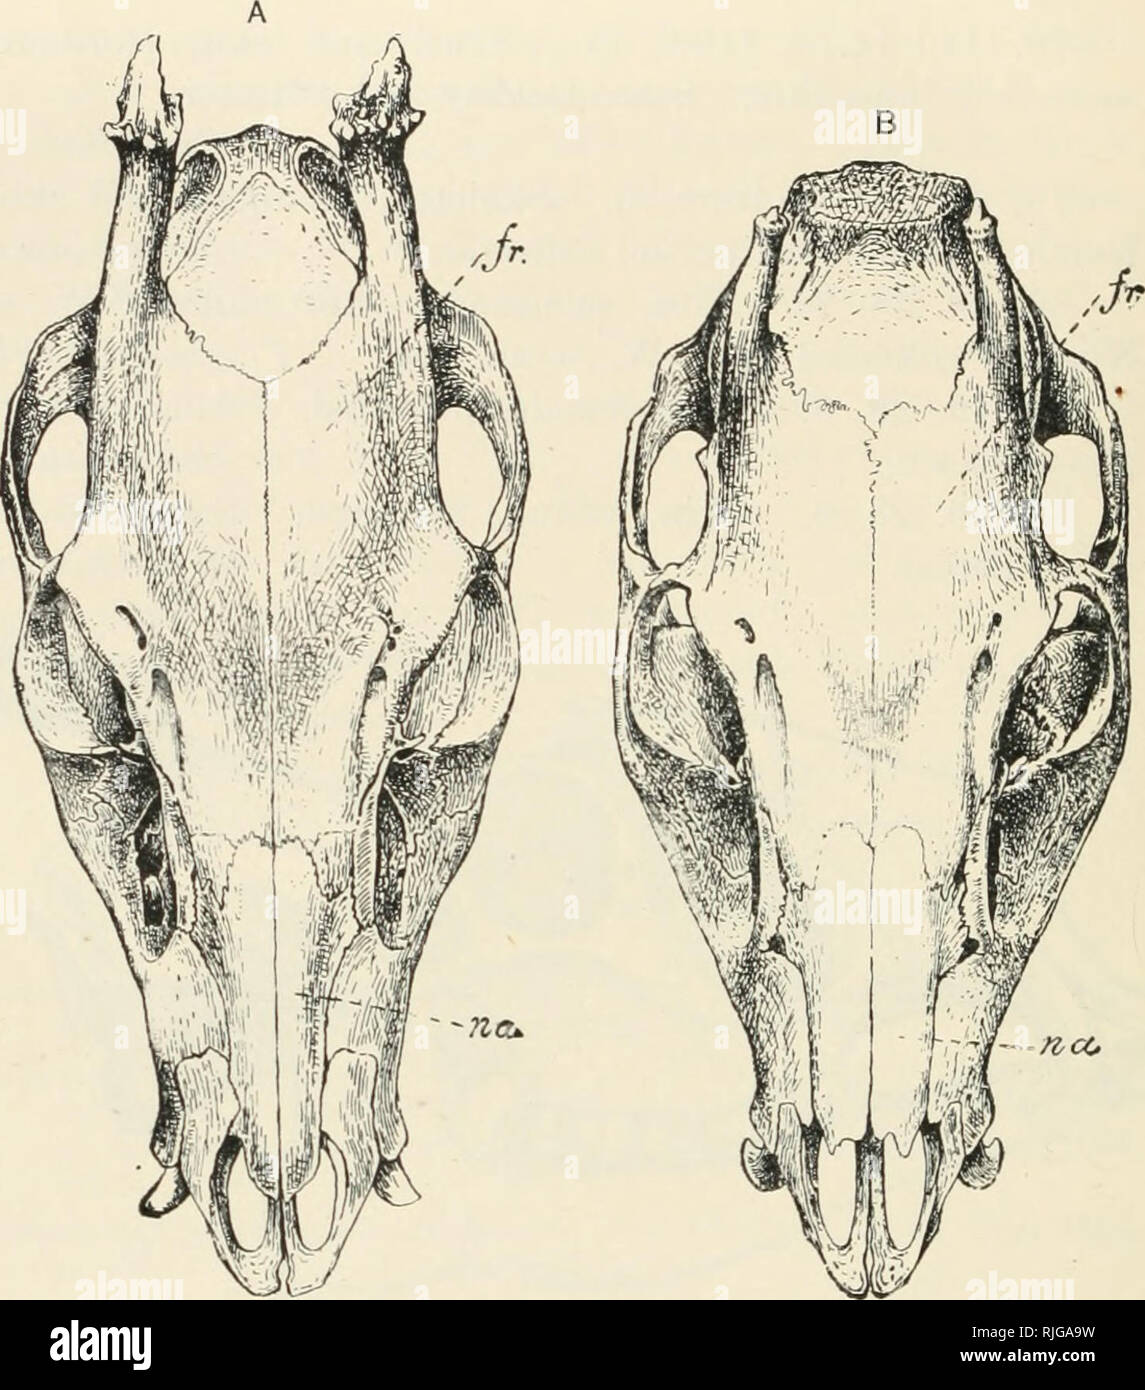 . Catalogue of the ungulate mammals in the British Museum (Natural History). British Museum (Natural History); Ungulates. CATAIiOGtfE OF UNGULATES. Fig. 8.—Front View of Skulls op Nixgpo (A), and Ichang Tuftkd Deer (B) {Elaphodus cej^halopJuis michianvs and E. c. ichangensis). /V. frontal; ««. nasals. From Lydekker, /'roc. Zool. Soc. 1904. C—Elaphodus cephalophus fociensis. Elaphodus michianus fociensis, Lydekker, Proc. Zool. Soc. 1904, vol. iv, p. 169. Typical locality Fiug-ling, Fo-kien, South-east China. Eather larger than ^. c. micJiianus and apparently a little darker, with much more whit Stock Photo